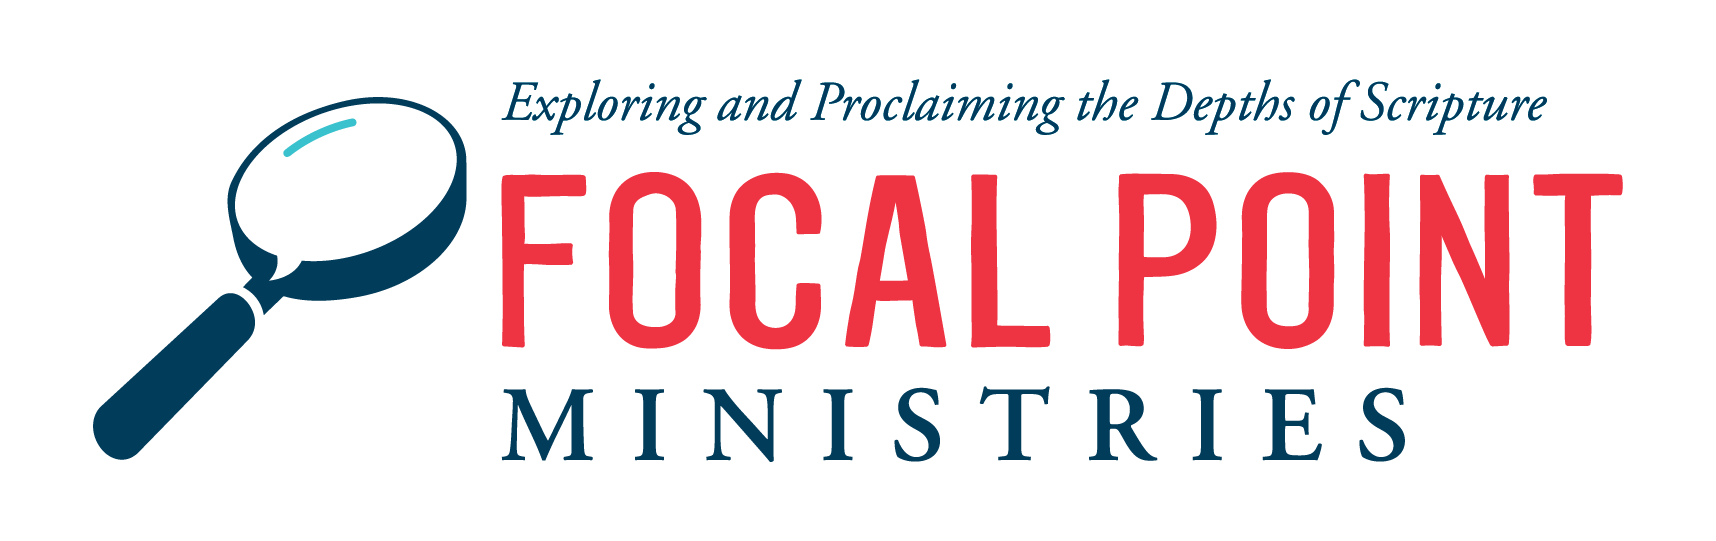 Focal Point Ministries